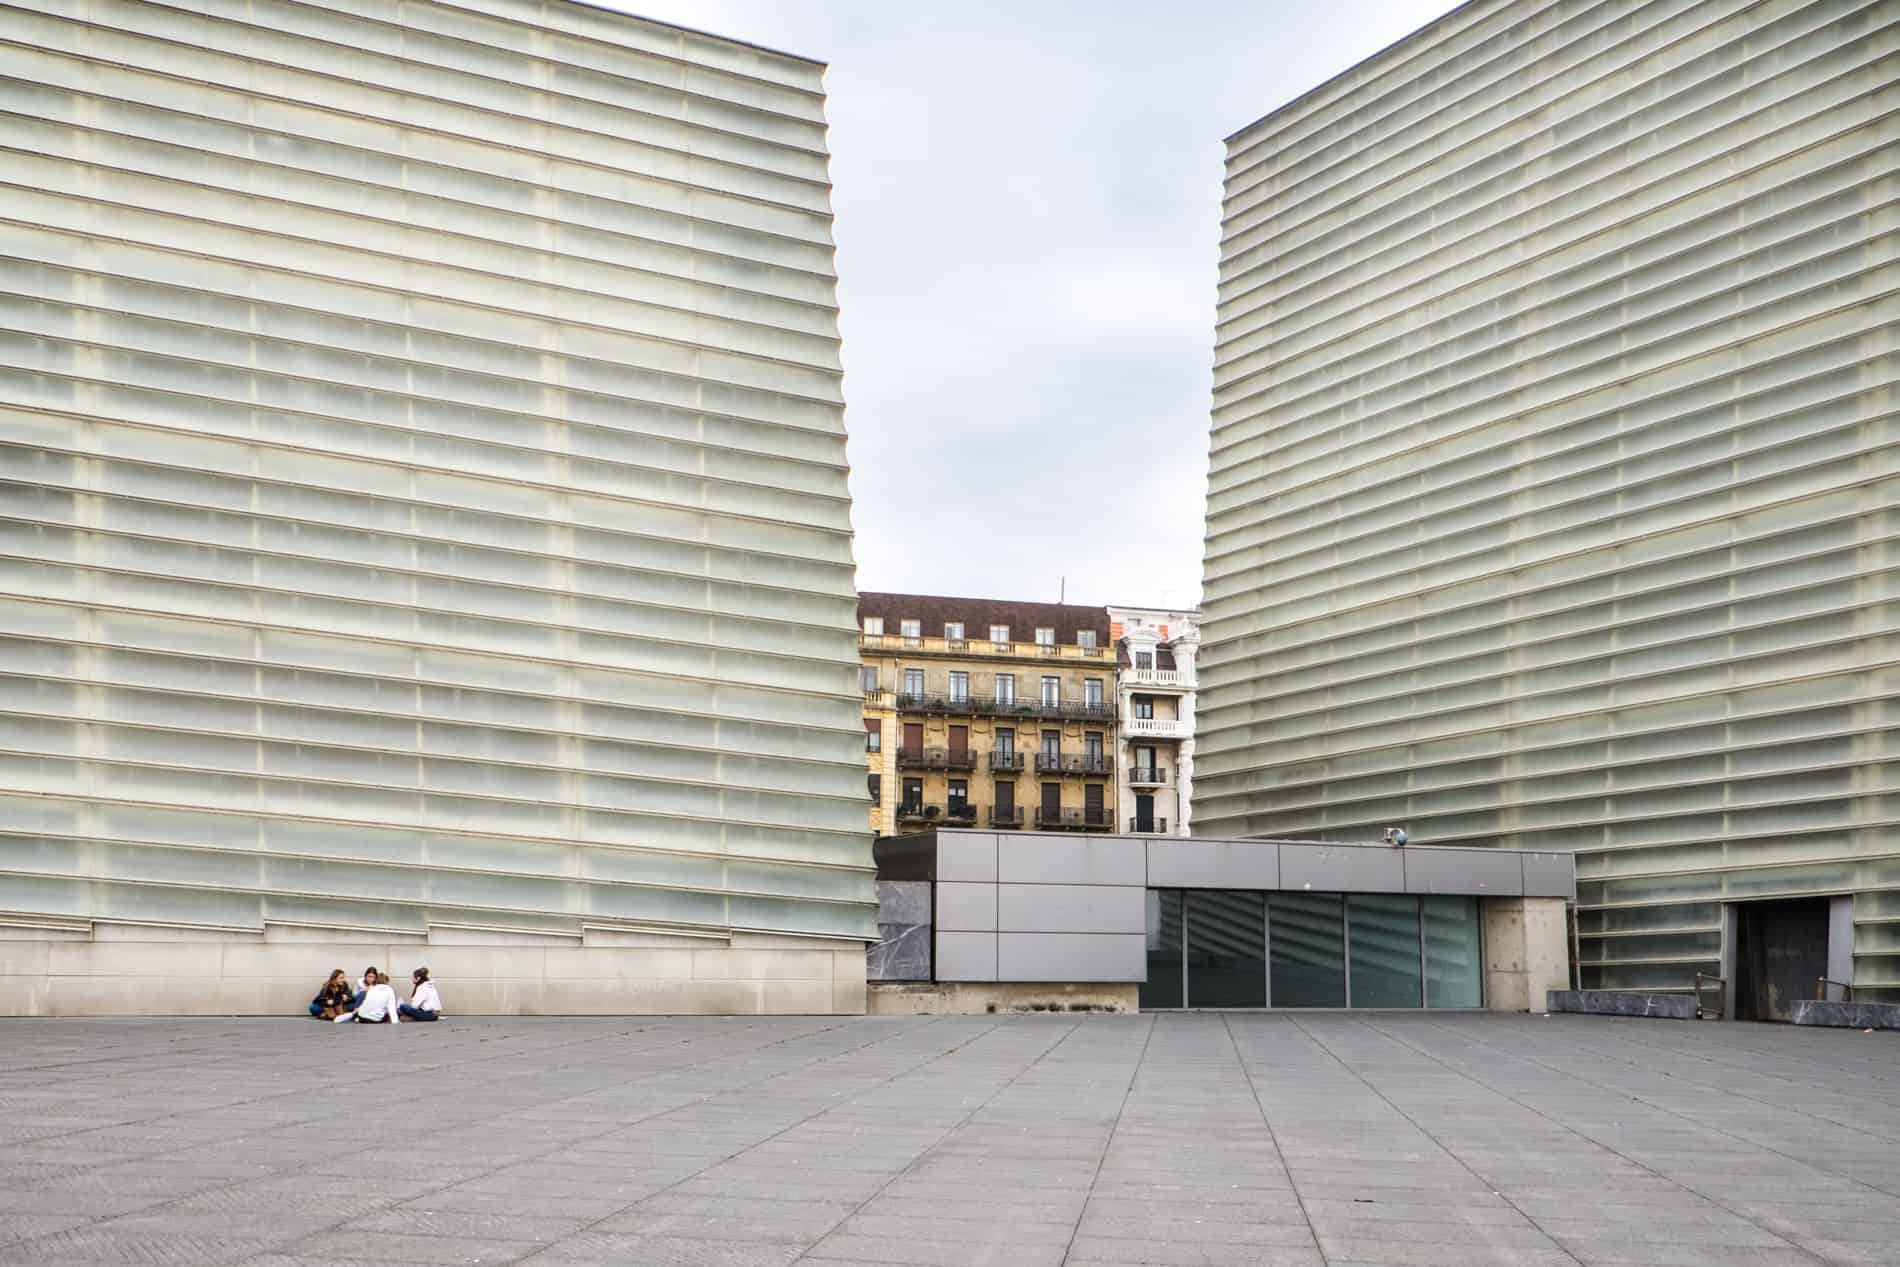 Four people sit in front of the modern, high rise walls of the Kursaal Congress Centre in San Sebastian, Spain. 